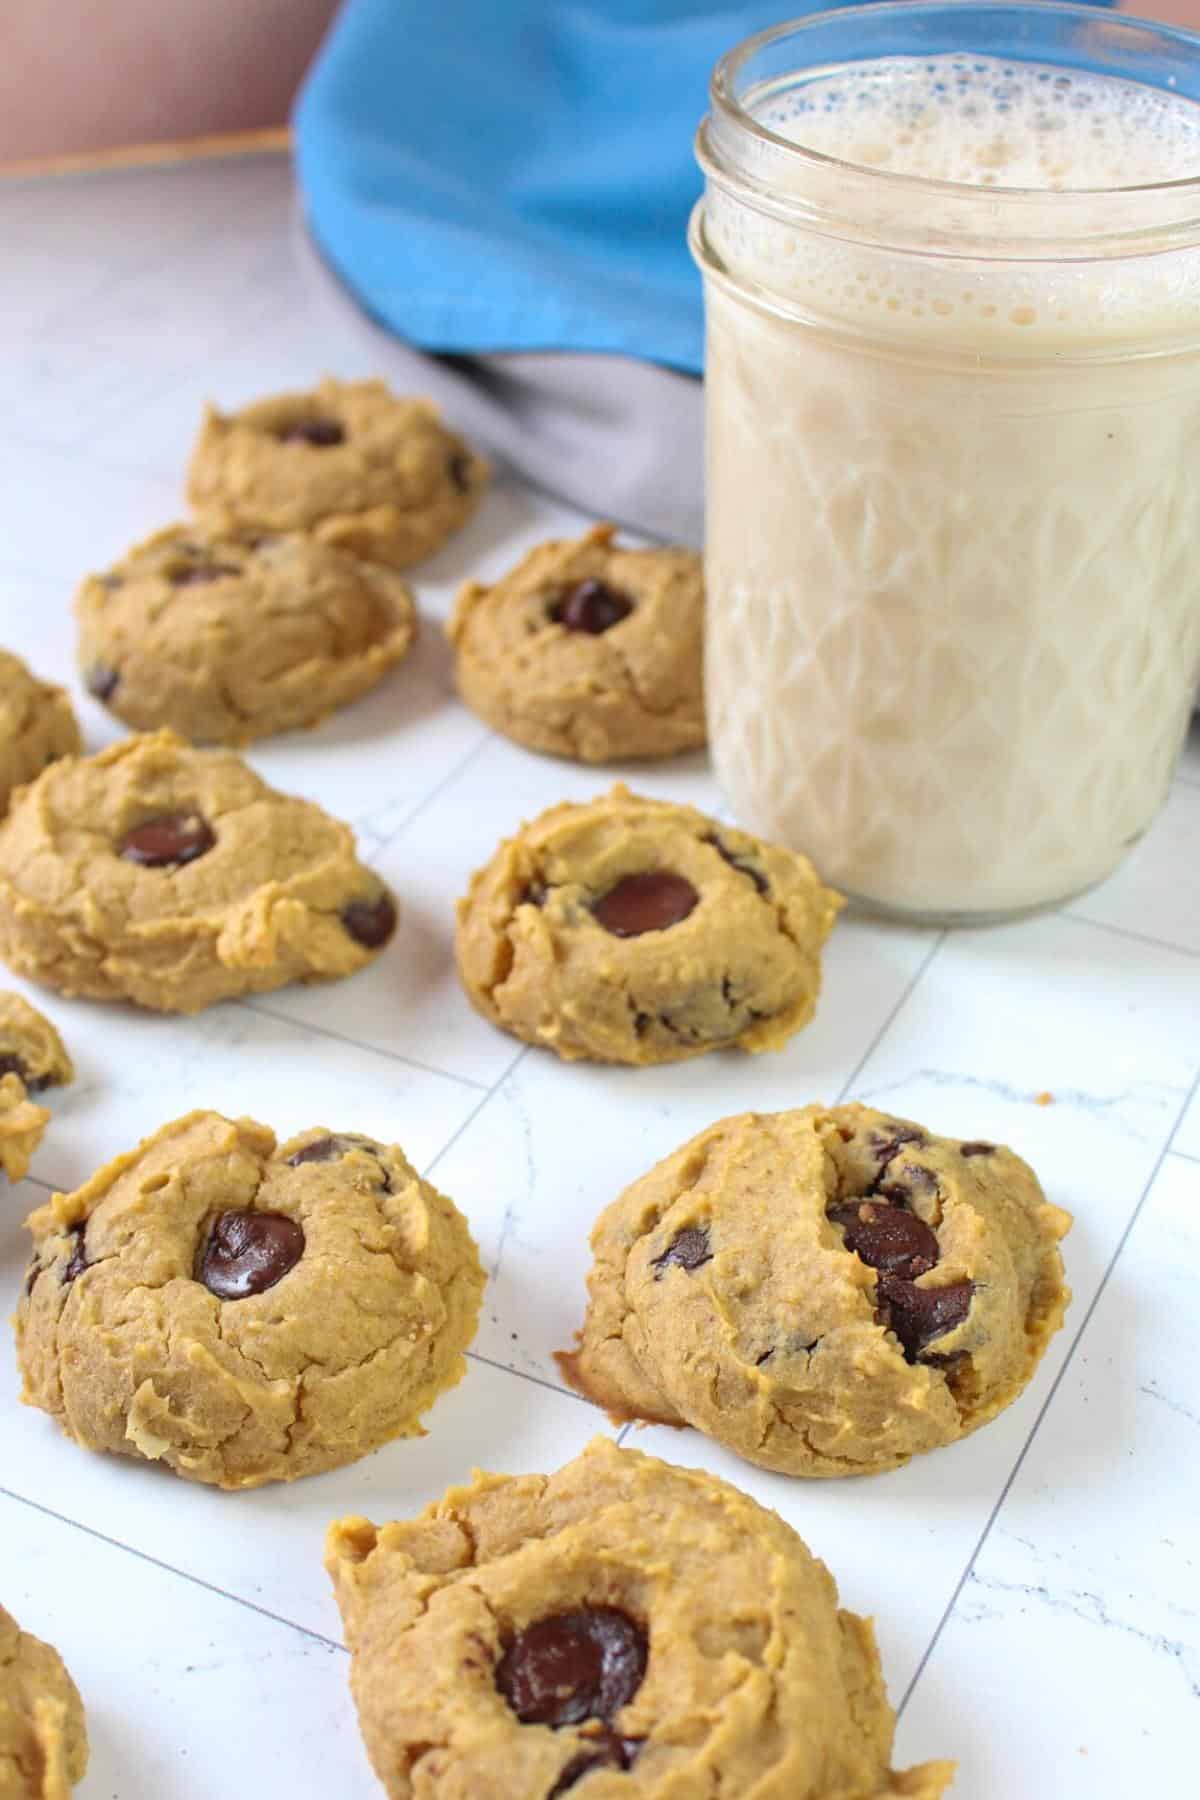 Chickpea chocolate chip cookies on a table with glass of milk